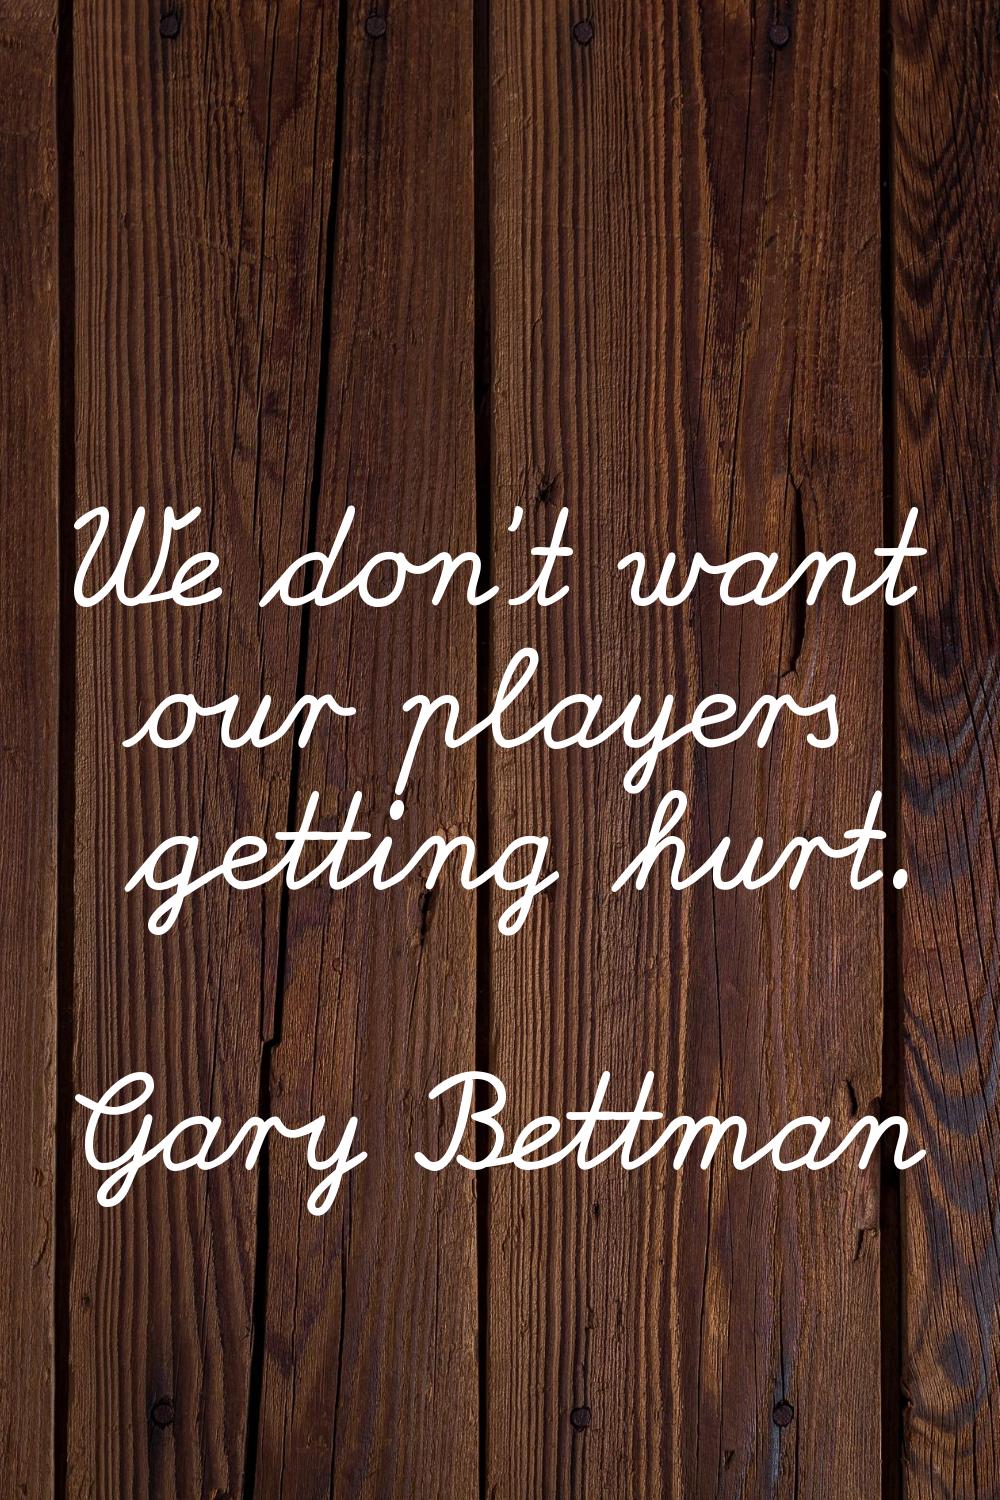 We don't want our players getting hurt.